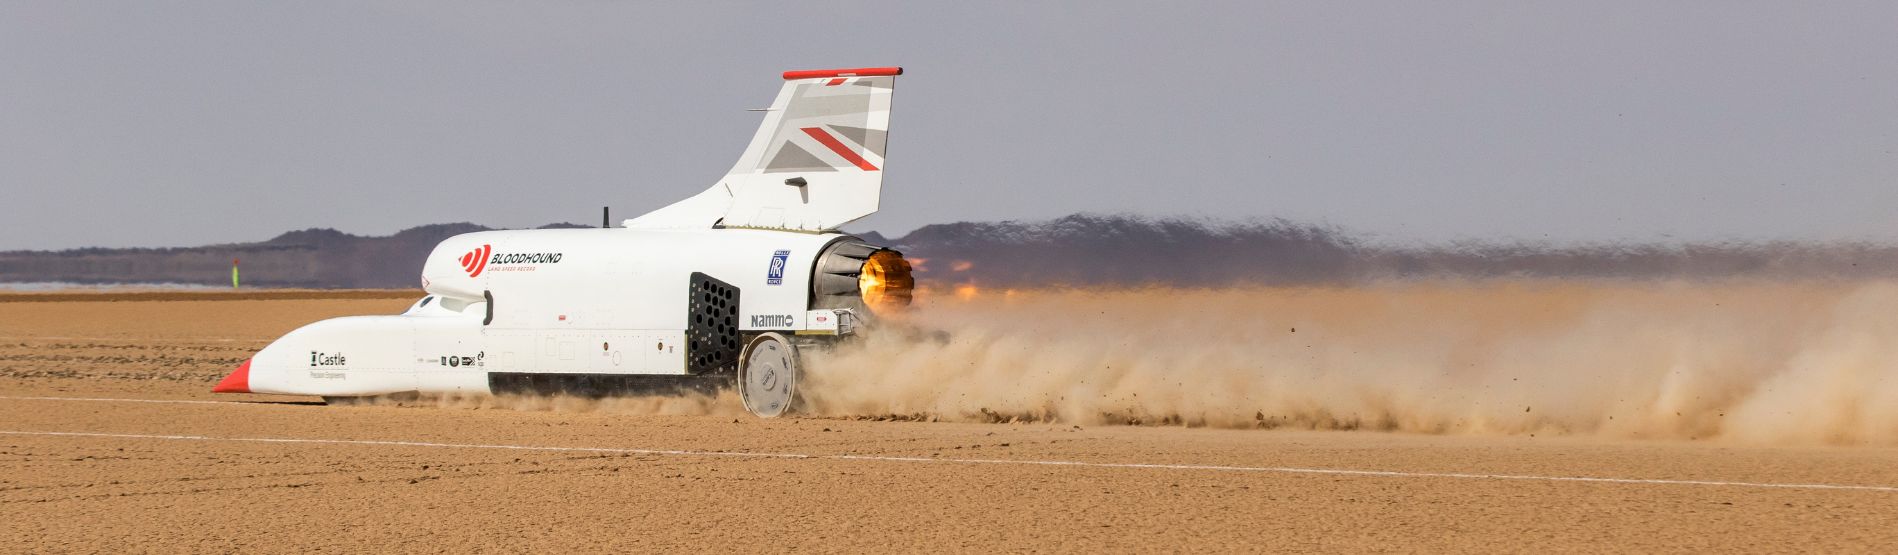 A photo of Bloodhound racing across the desert.